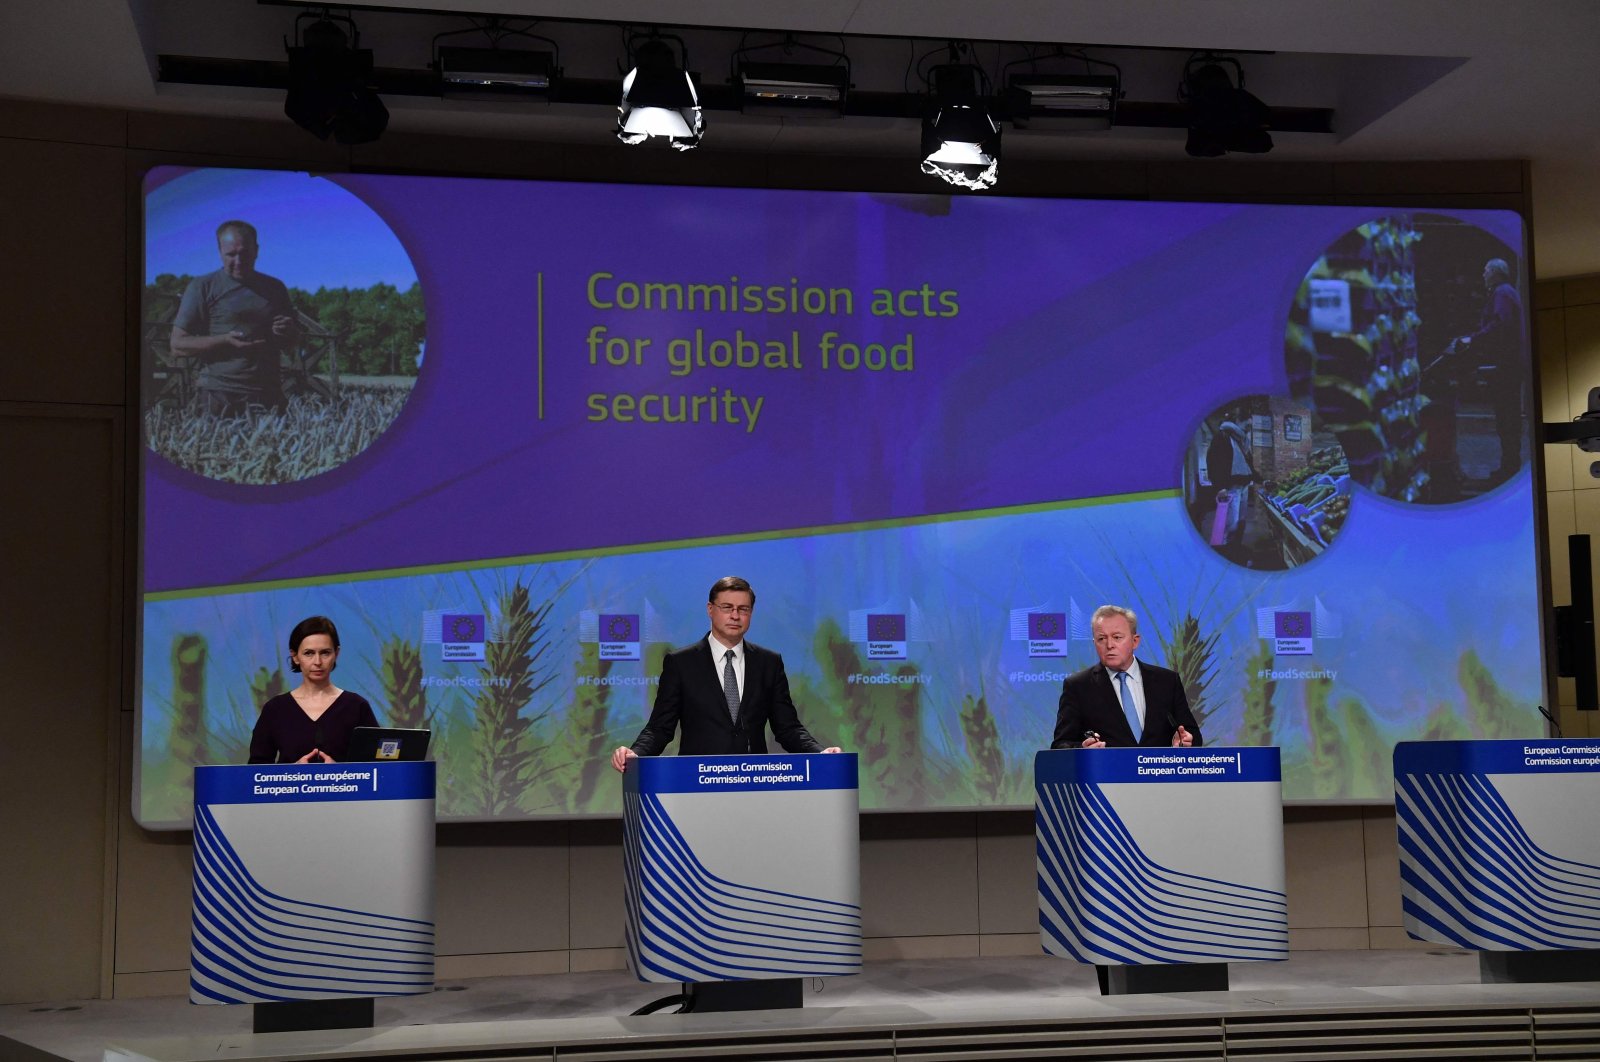 European Commission Vice-President Valdis Dombrovski (L) and EU Agriculture Commissioner Janusz Wojciechowski (R) give a press conference on safeguarding food security and reinforcing the resilience of food systems at the EU headquarters in Brussels, Belgium, March 23, 2022. (AFP Photo)